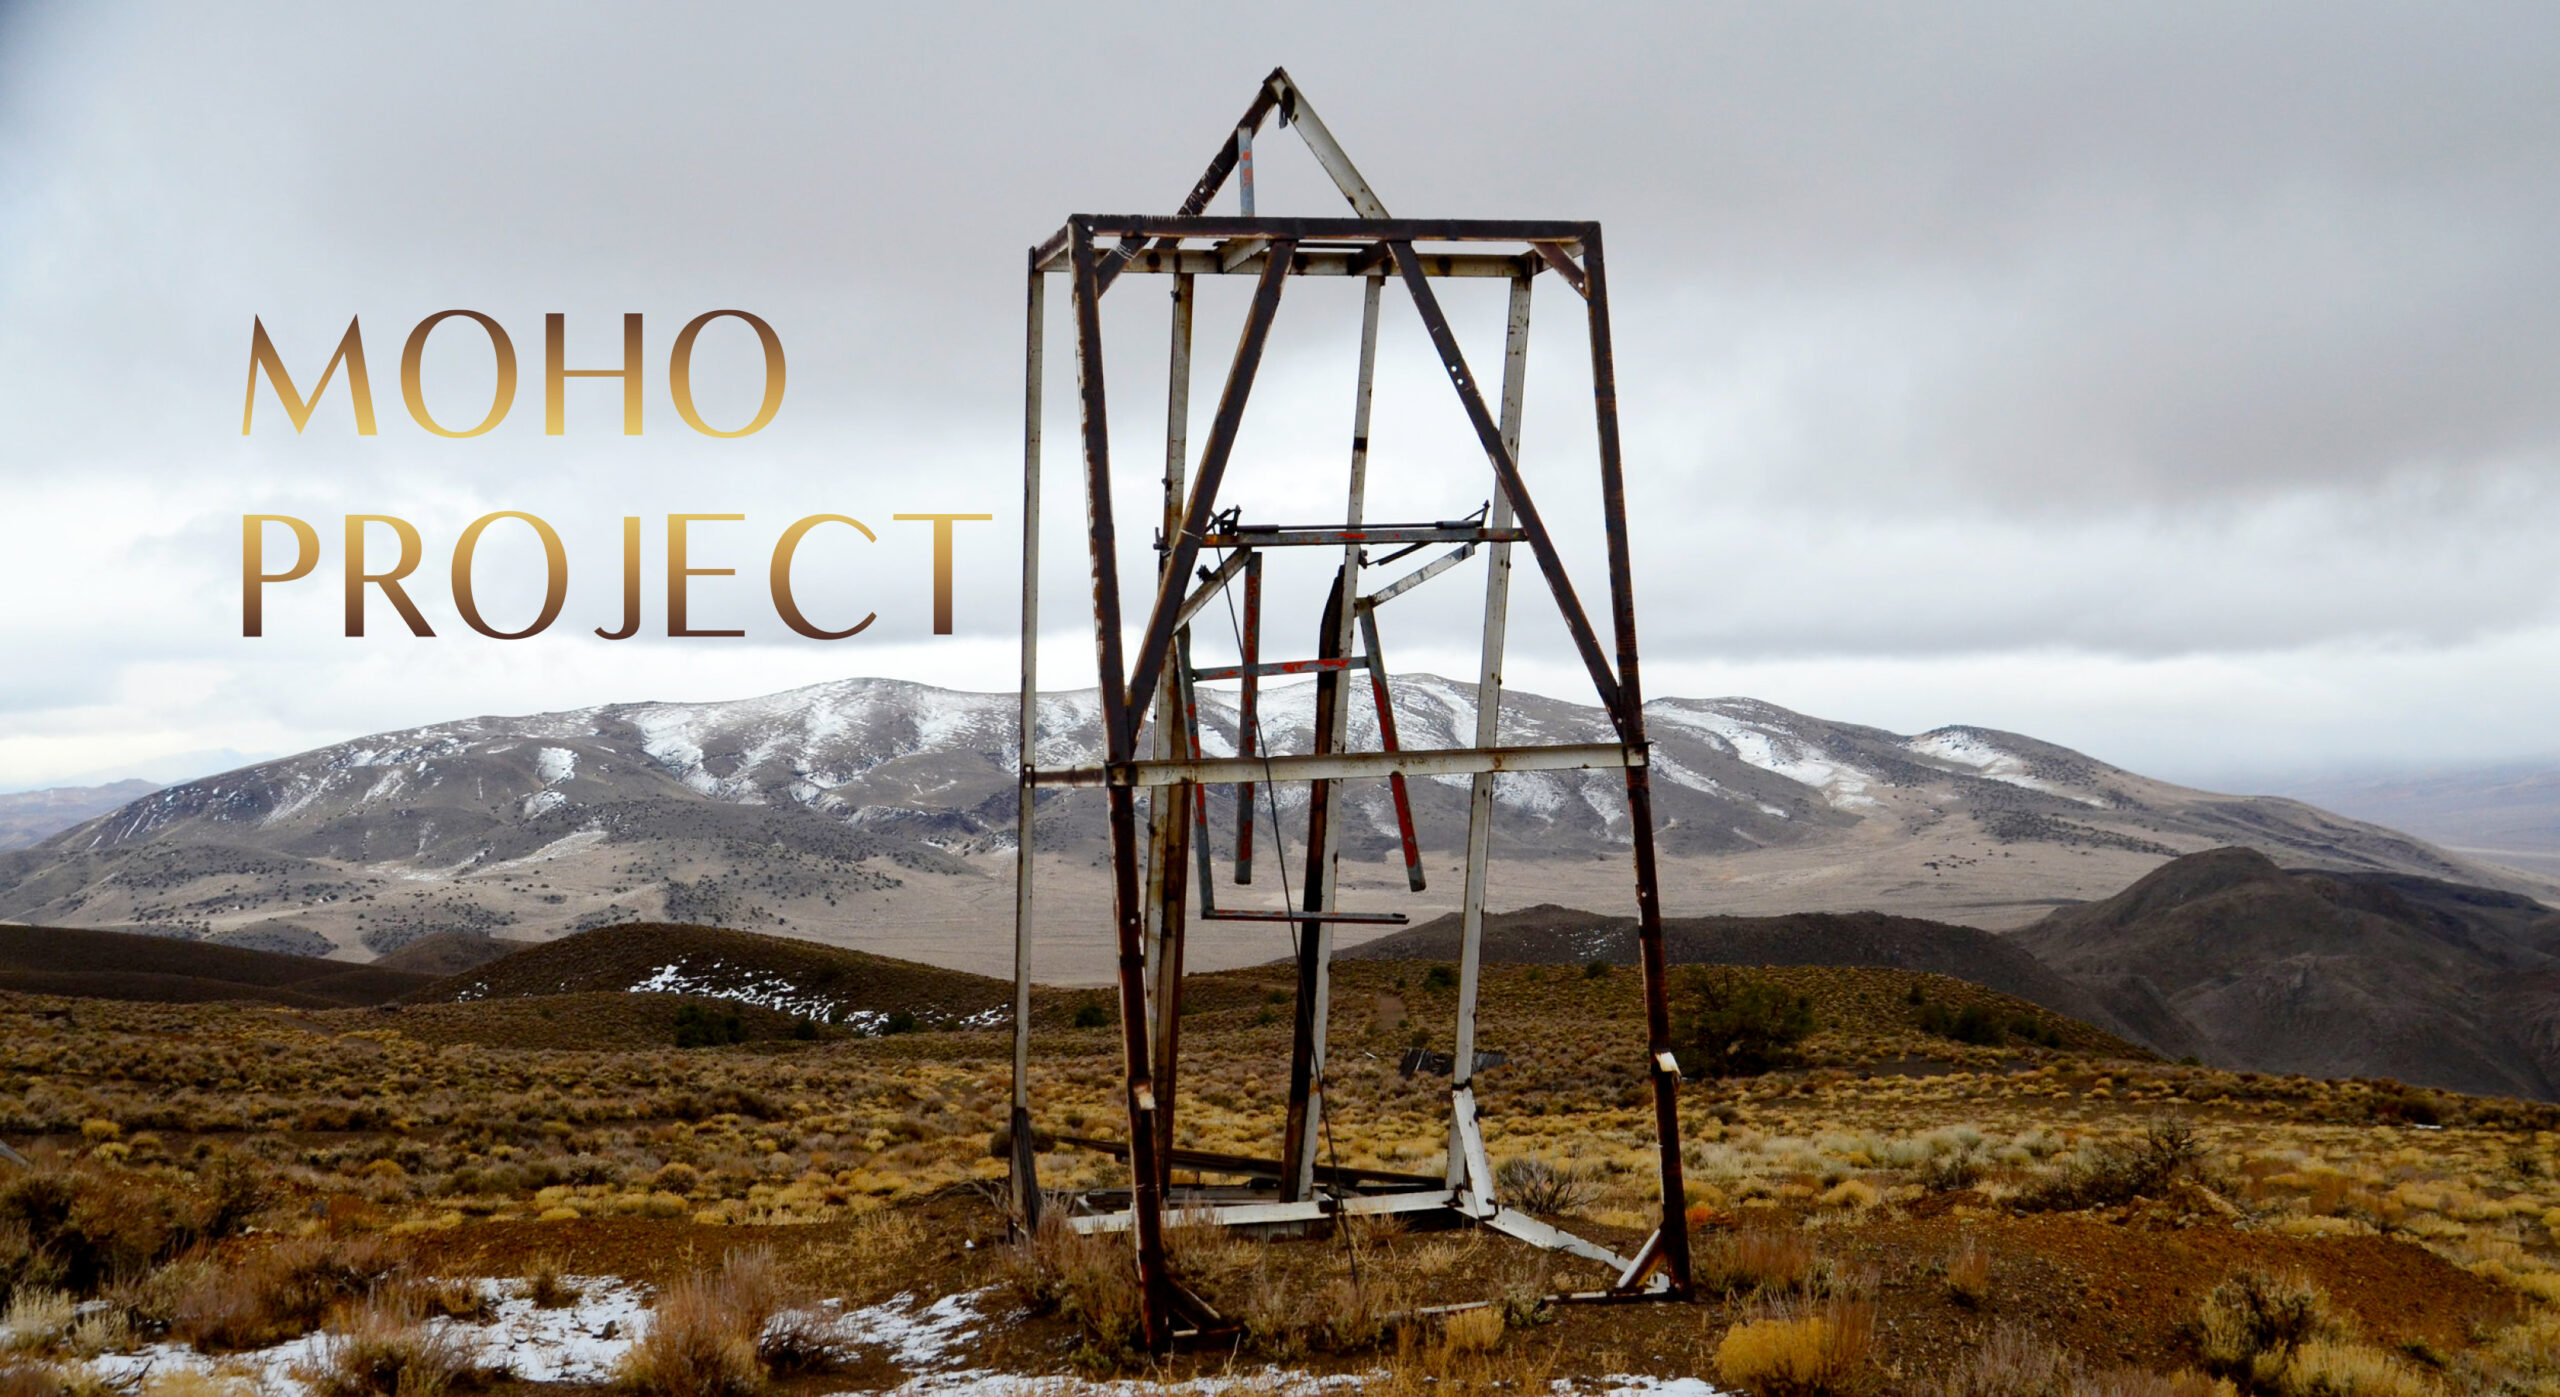 Moho Project